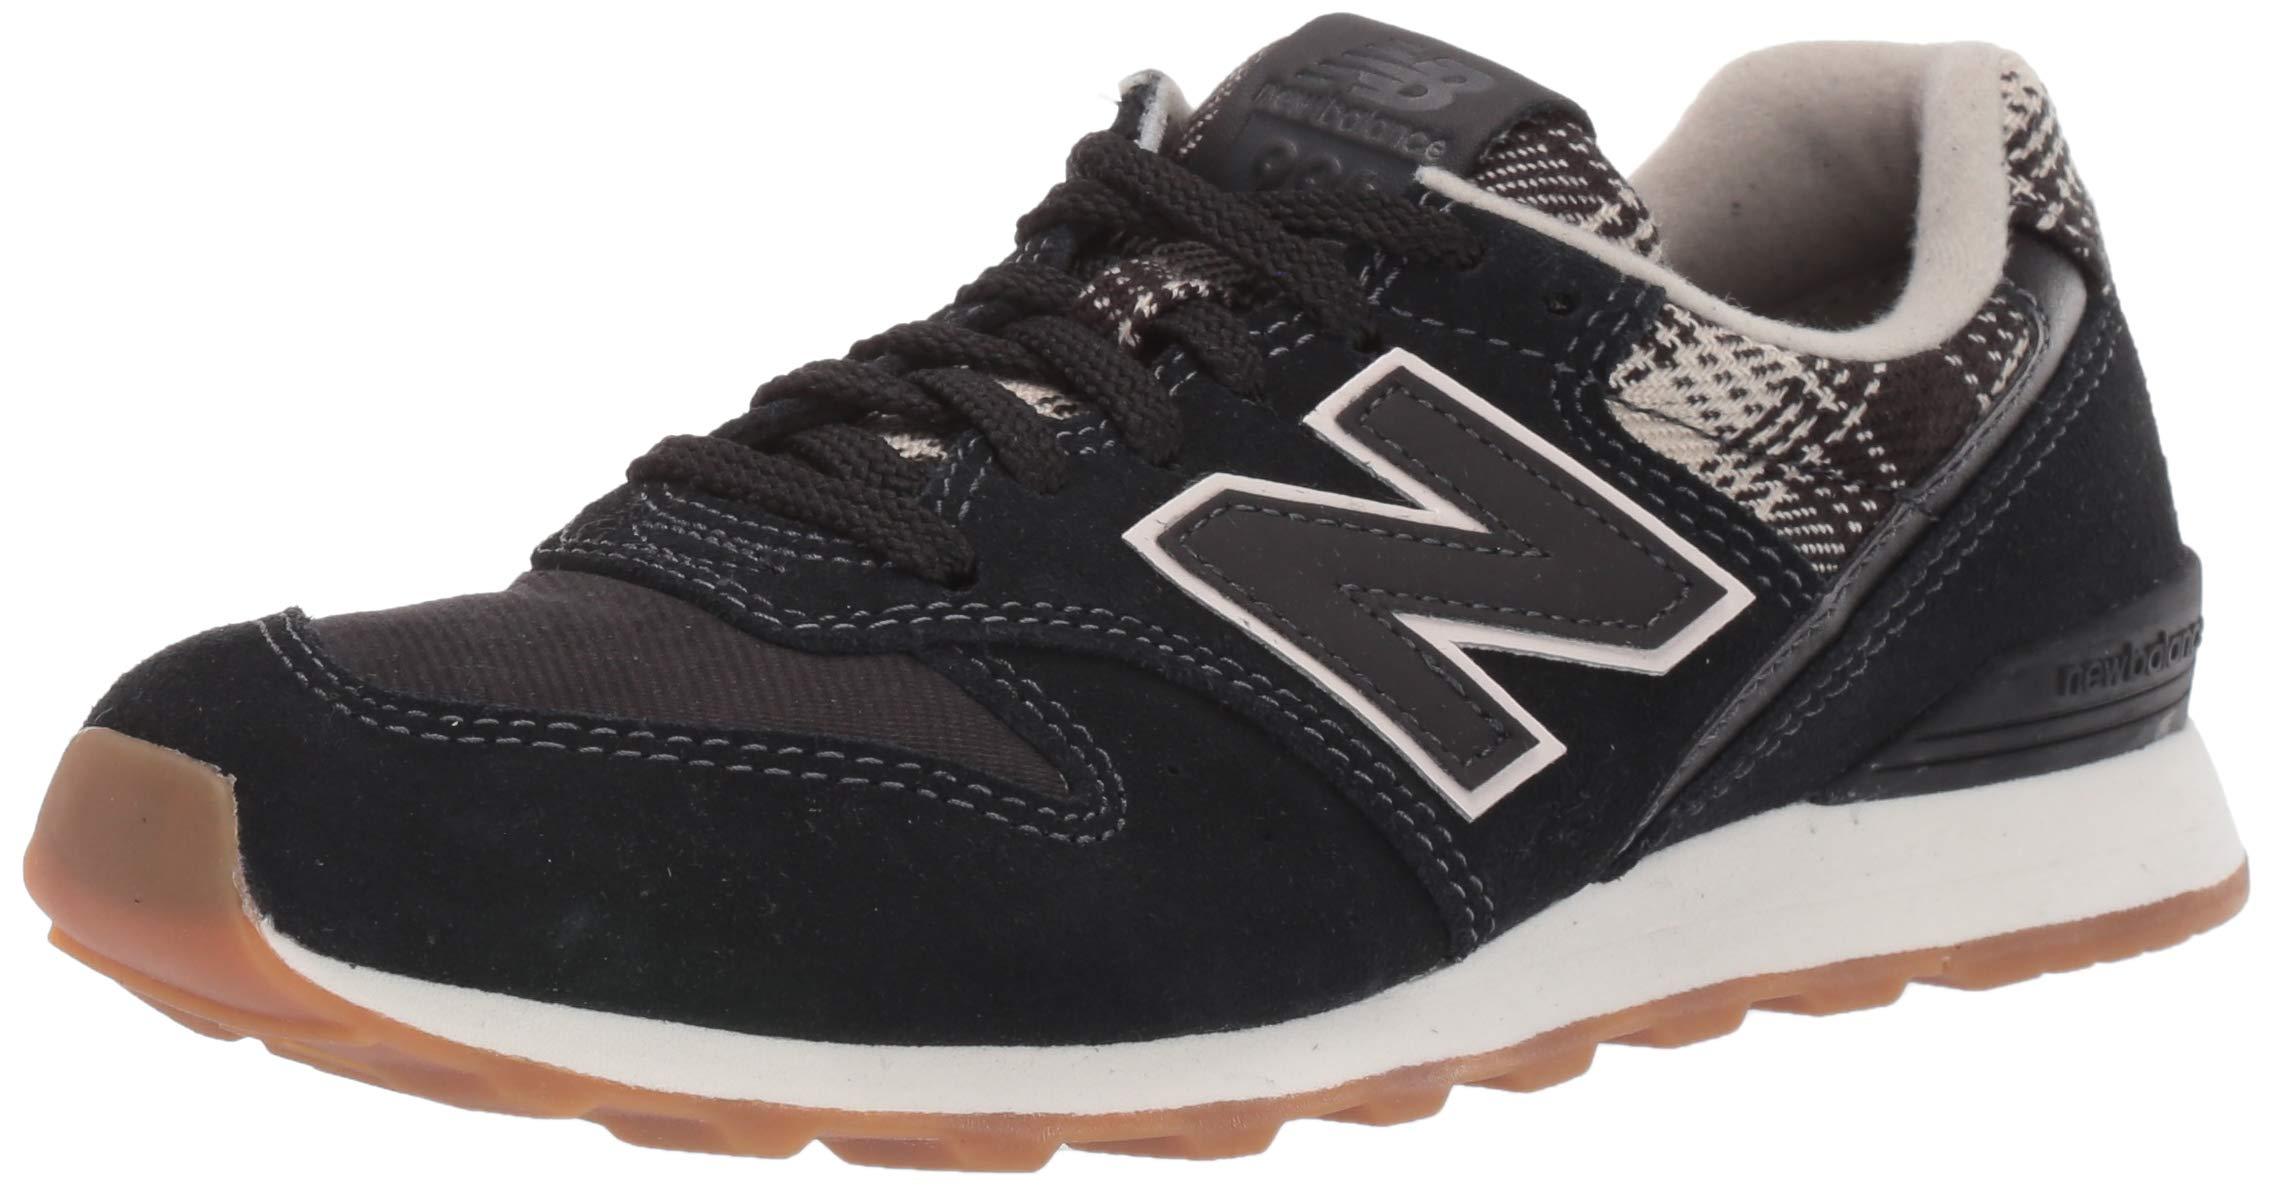 New Balance 996 Trainers Femmes Red Low Top Trainers | Lyst